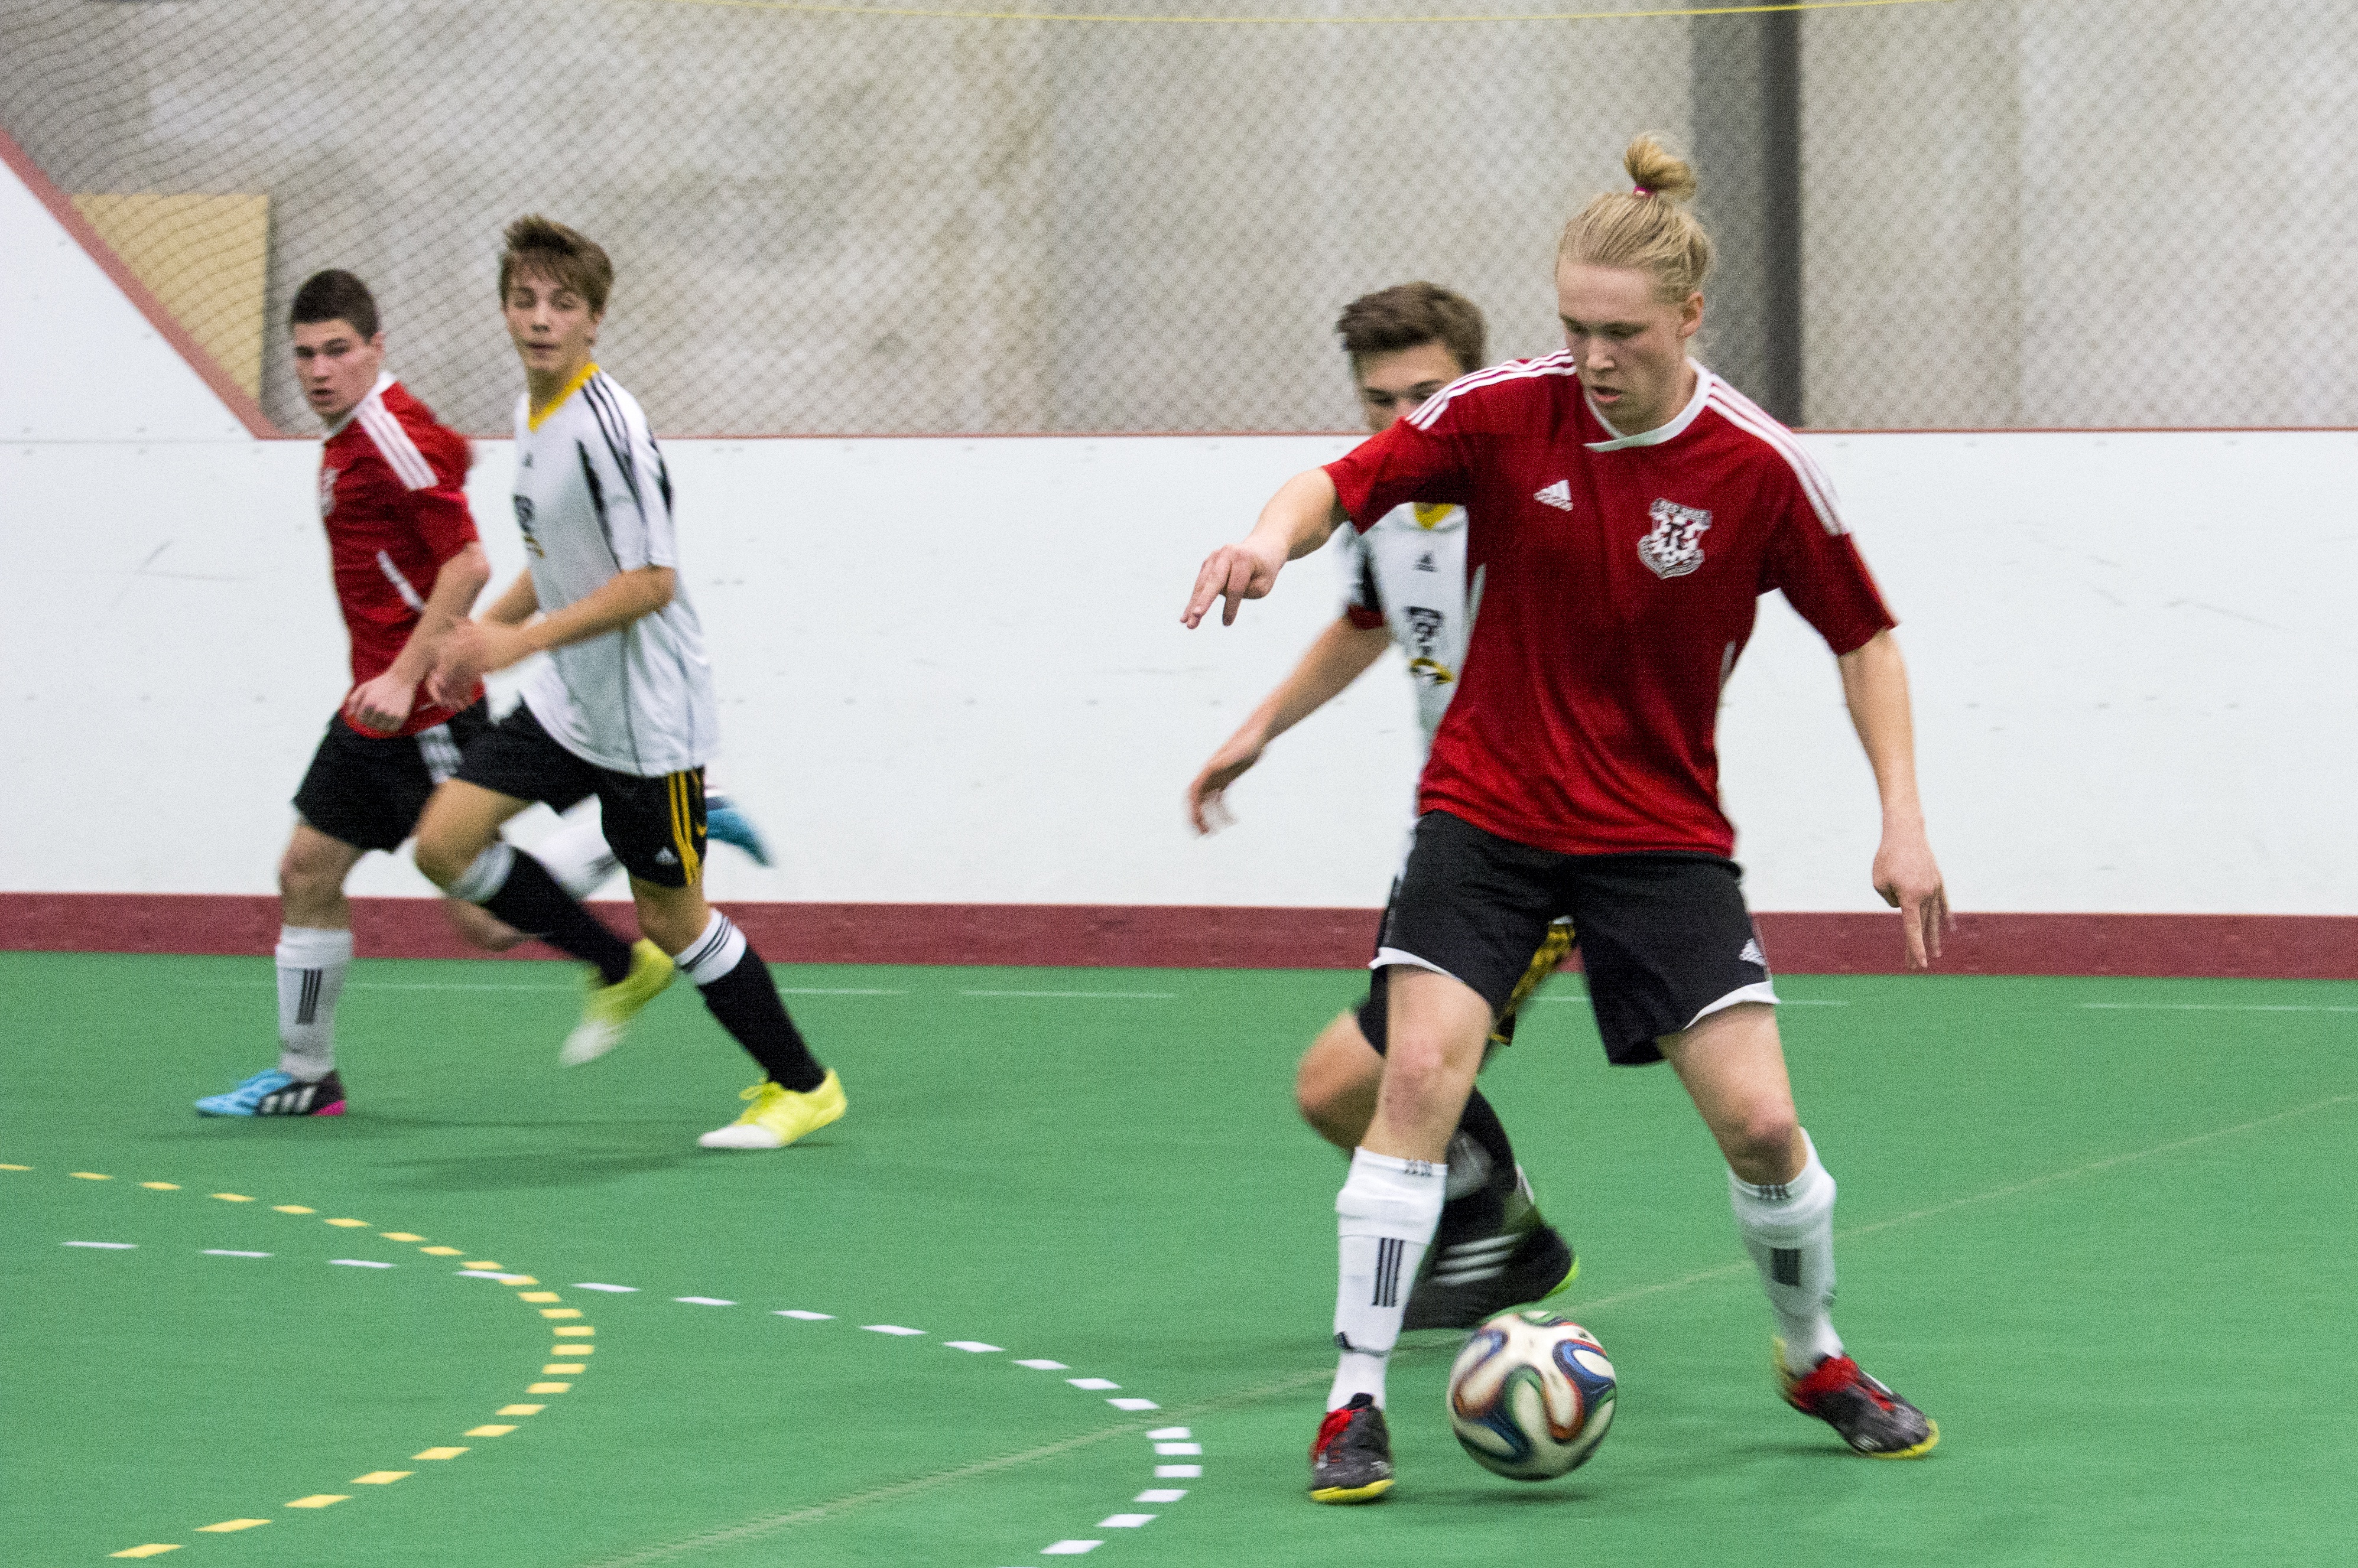 BIG WIN – The U-18 Tier II Renegades indoor soccer club won a provincial gold medal on their home field over the weekend at the Collicutt Centre. Renegade Simon Fuller works the ball towards the Medicine Hat Rattlers net in a match